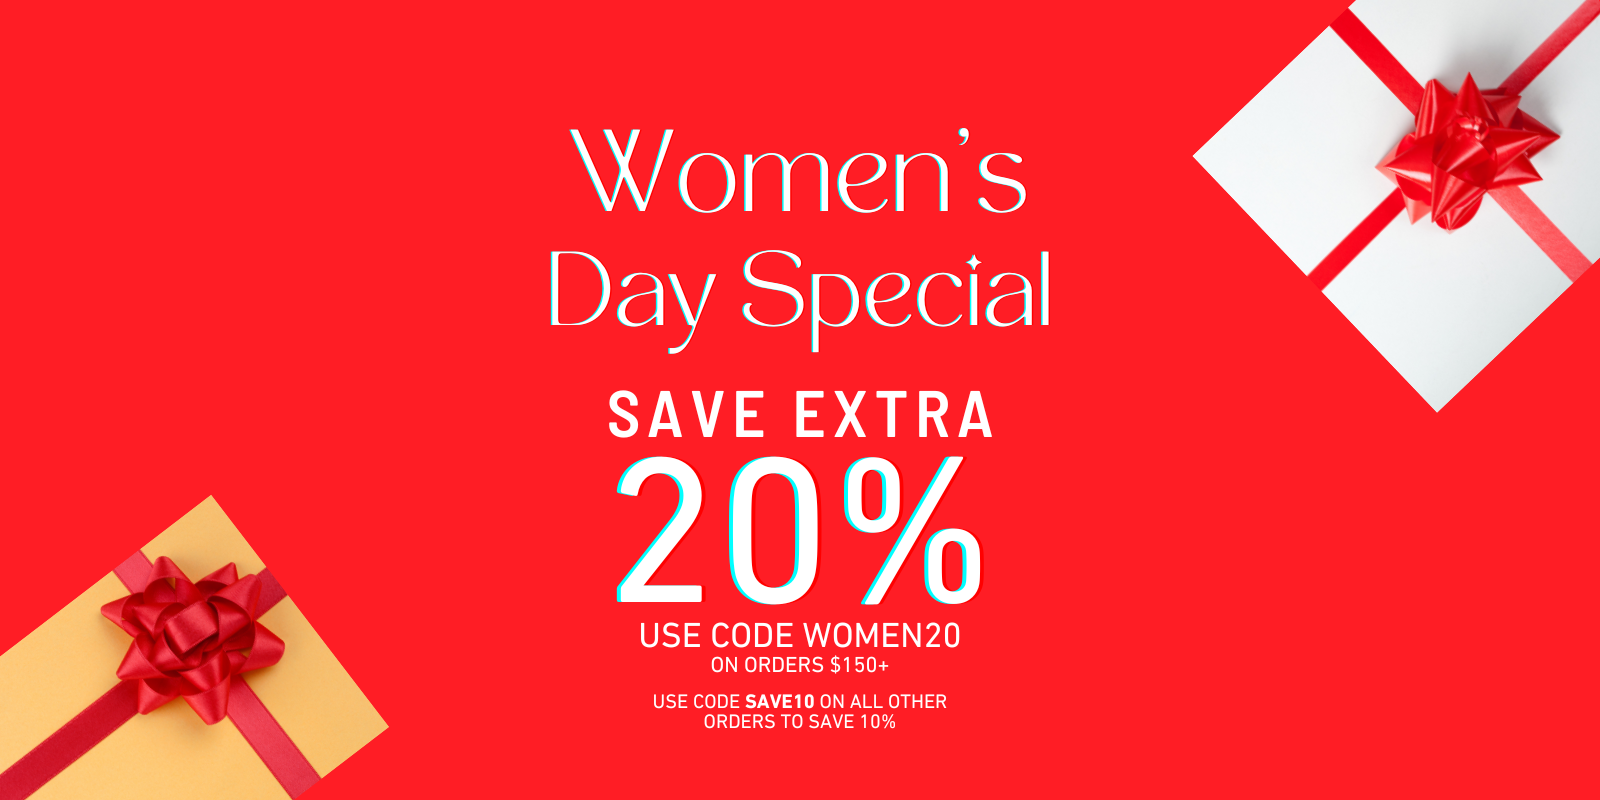 WOMEN'S DAY SPECIAL SAVE EXTRA 20% OFF USE CODE WOMEN20 ON ORDERS $150+, USE CODE SAVE10 ON ALL OTHER ORDERS TO SAVE 10%